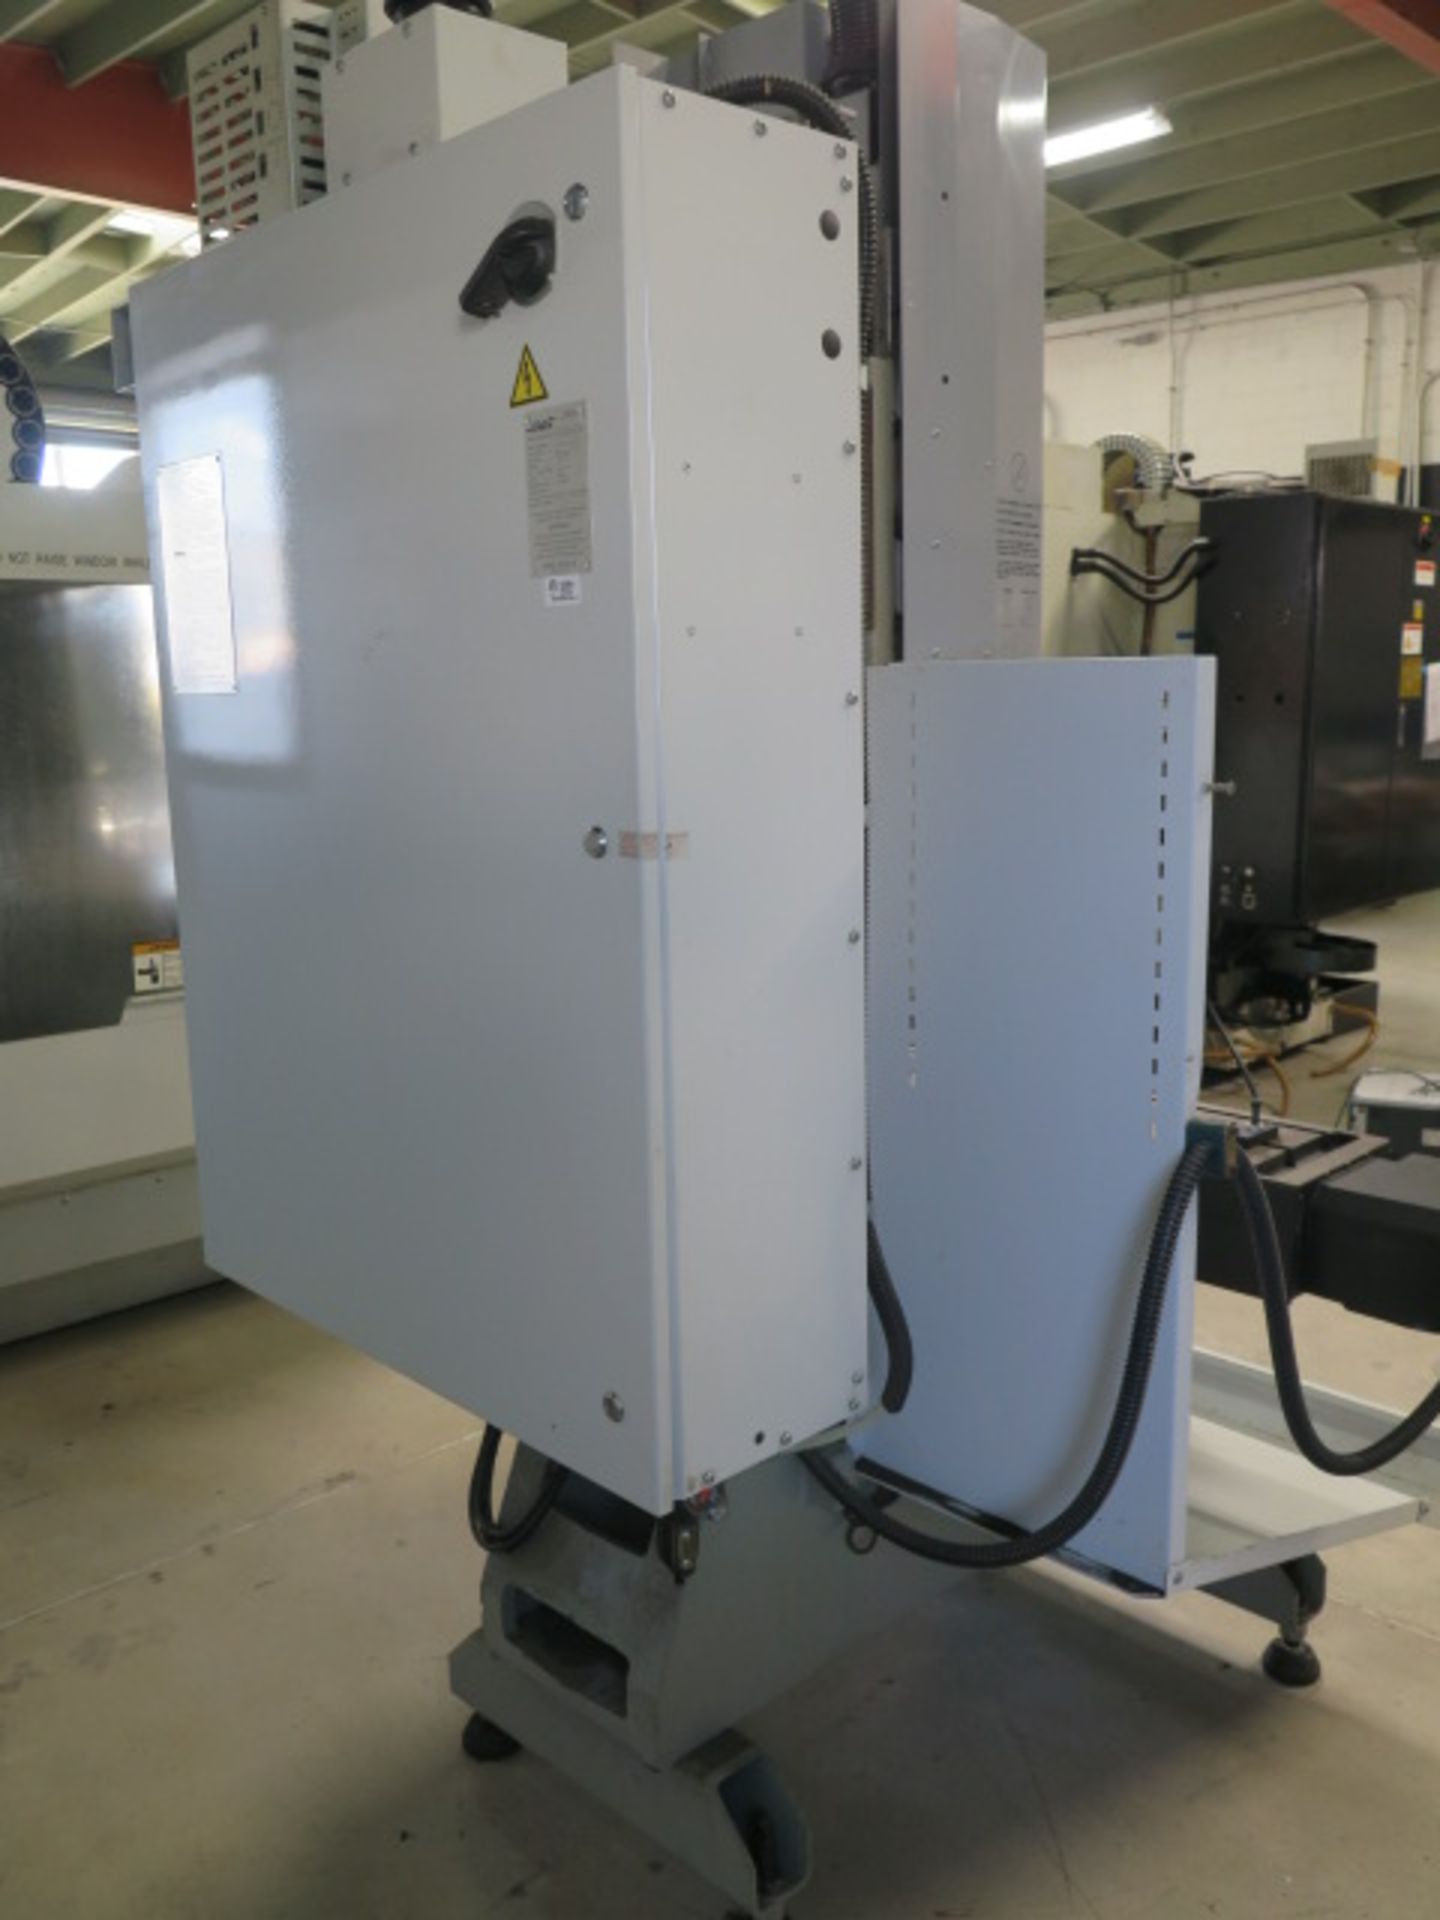 2002 Haas TM-1 CNC Tool Room Mill s/n 29002 w/ 40-Taper Spindle, 10 ½” x 48” Table, Sold AS IS - Image 12 of 15